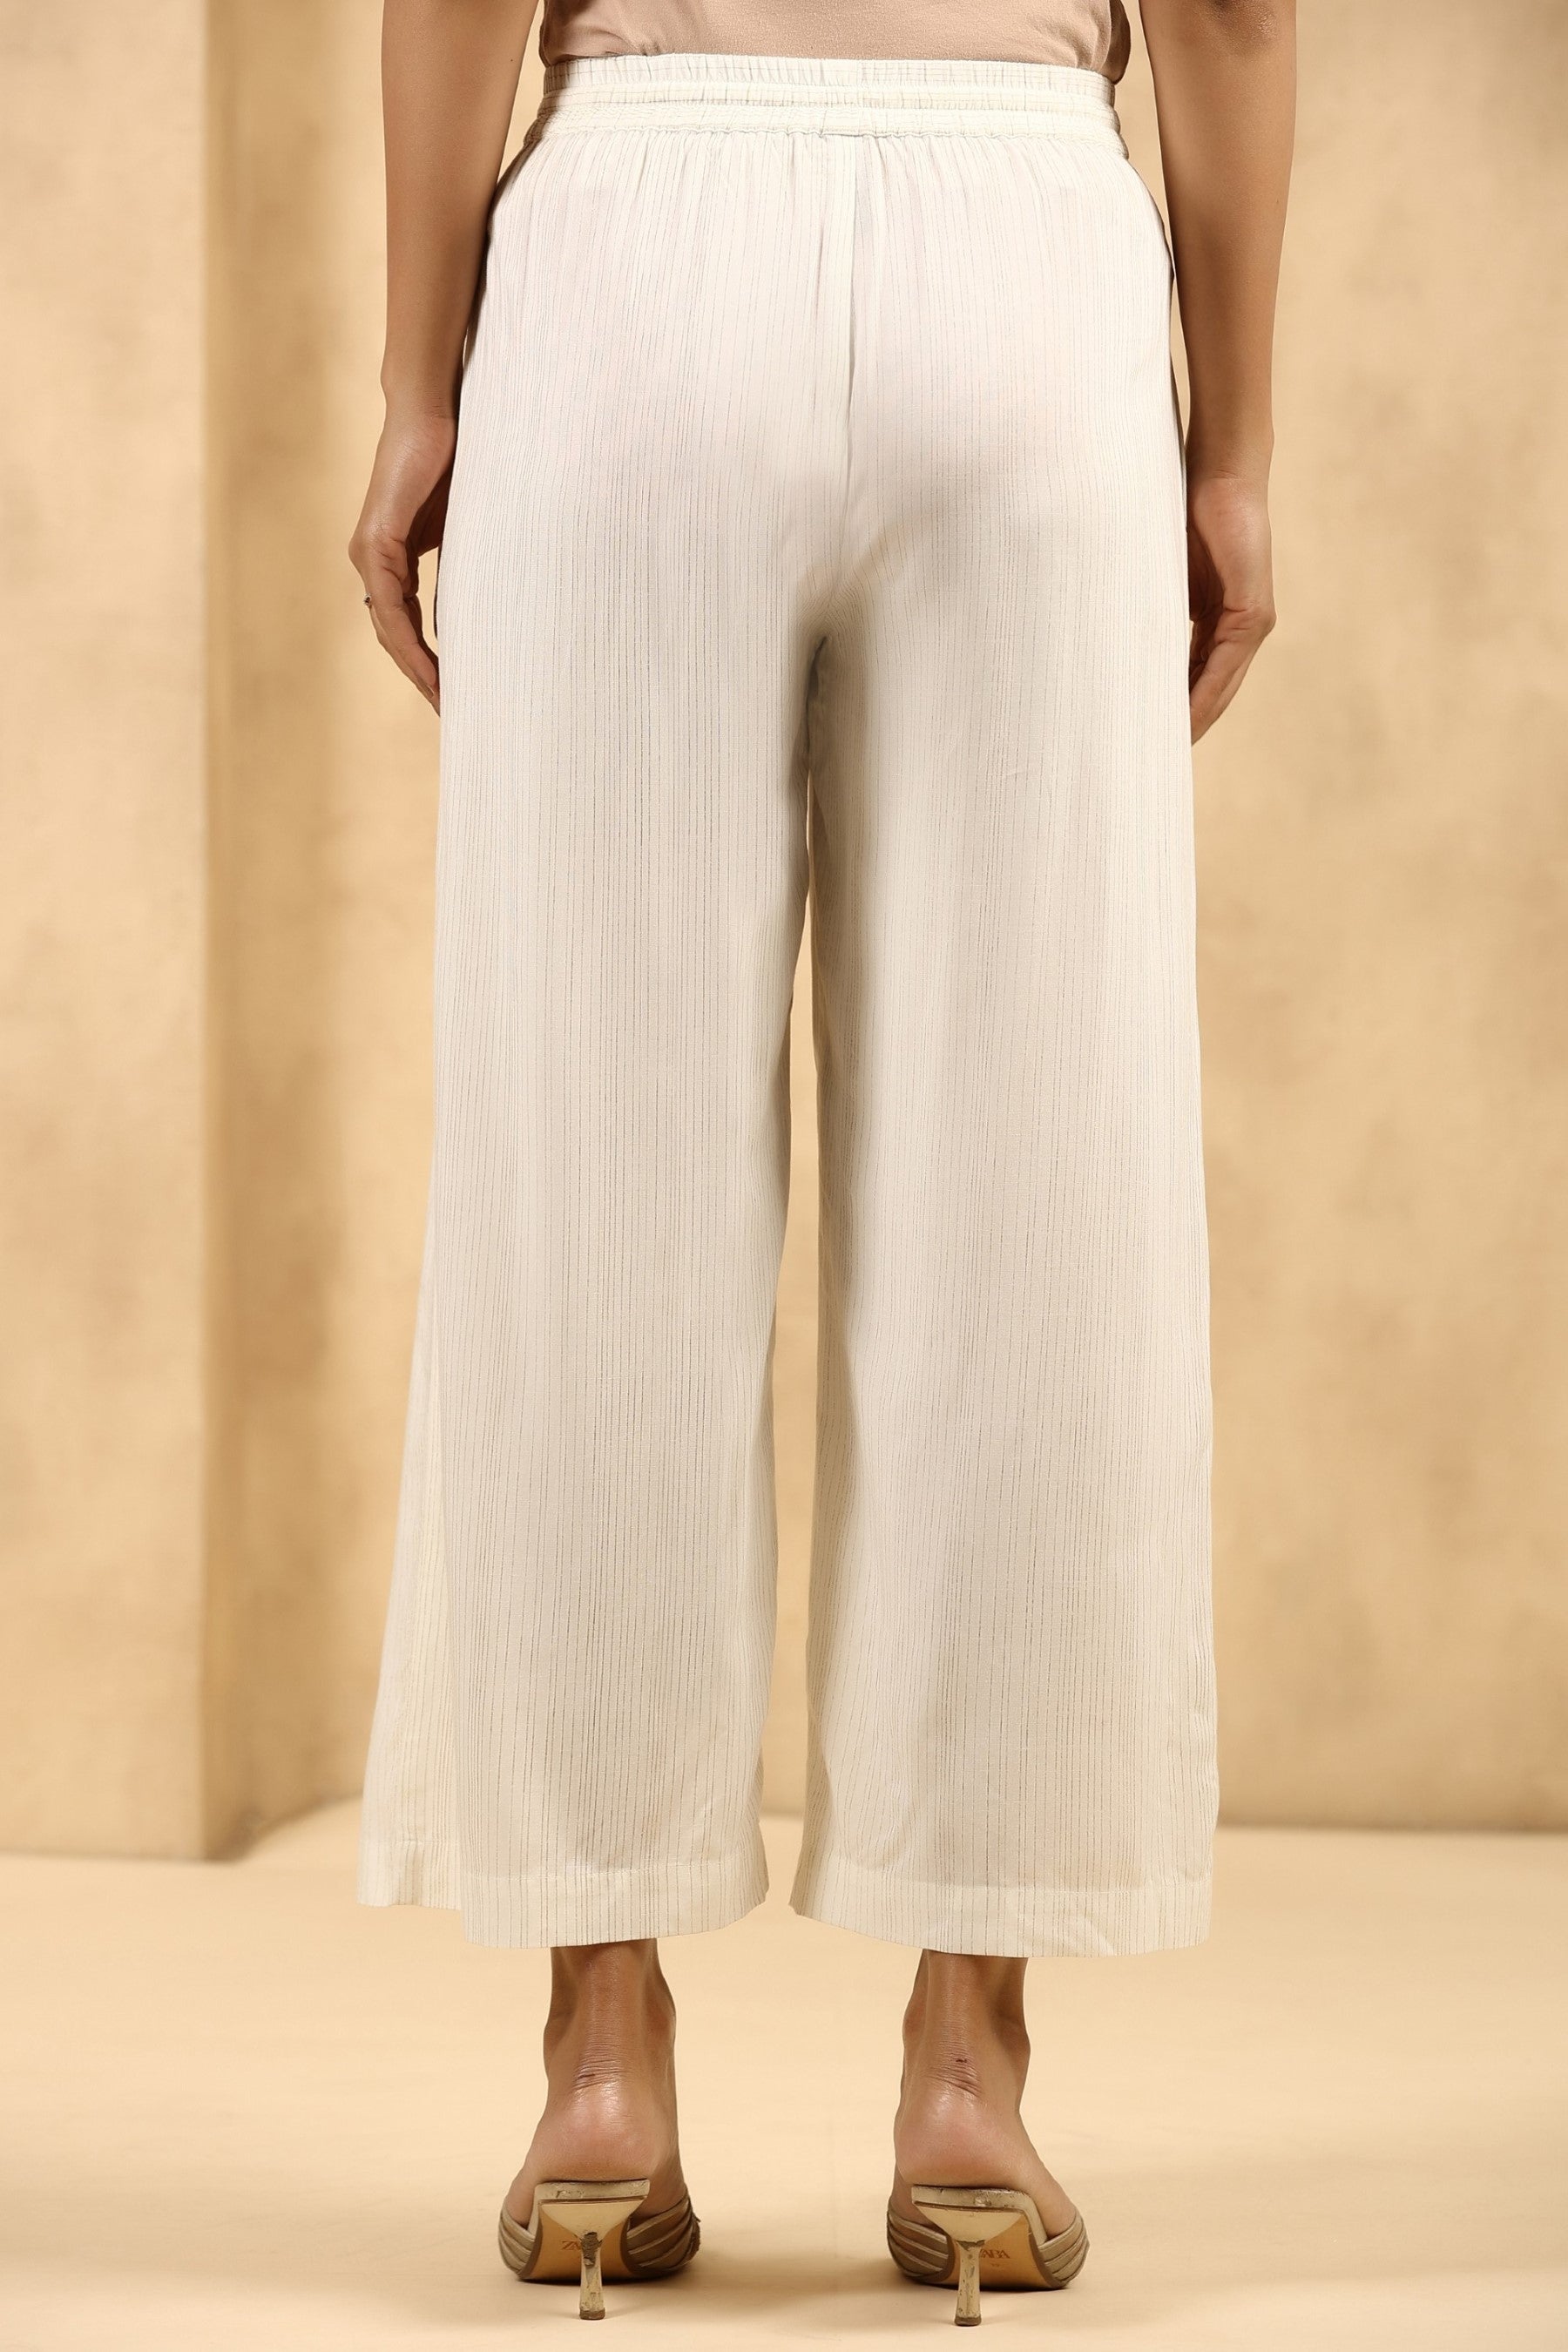 Off-White Rayon Solid Wide Leg Palazzo